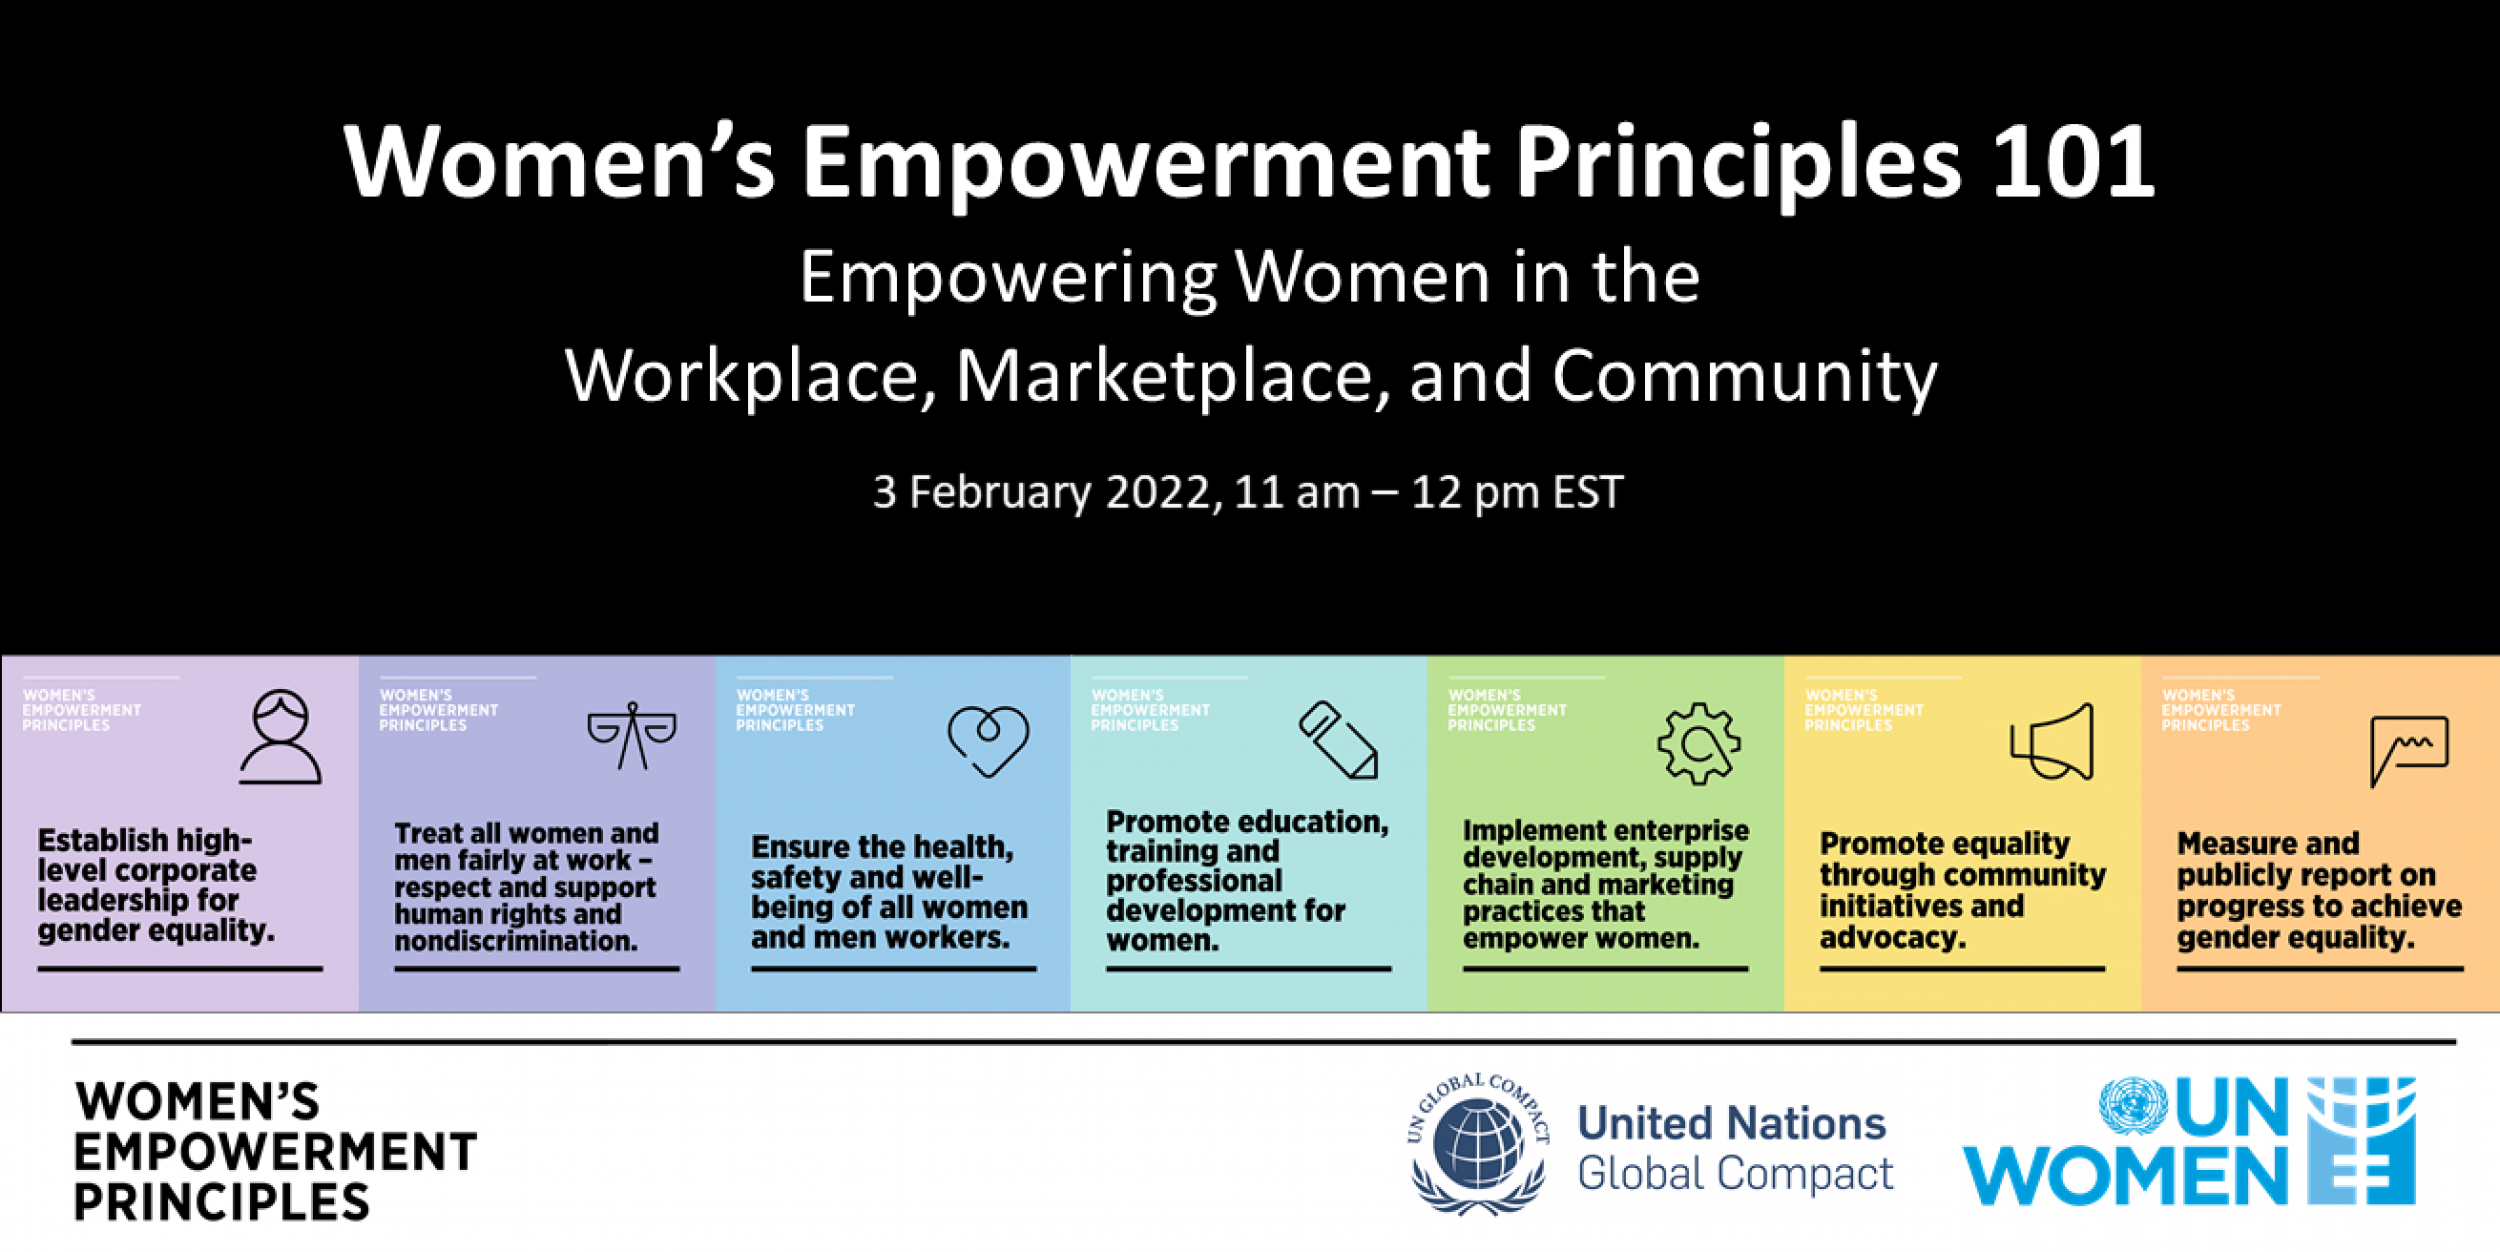 Women's Empowerment Principles 101 Empowering Women in the Workplace